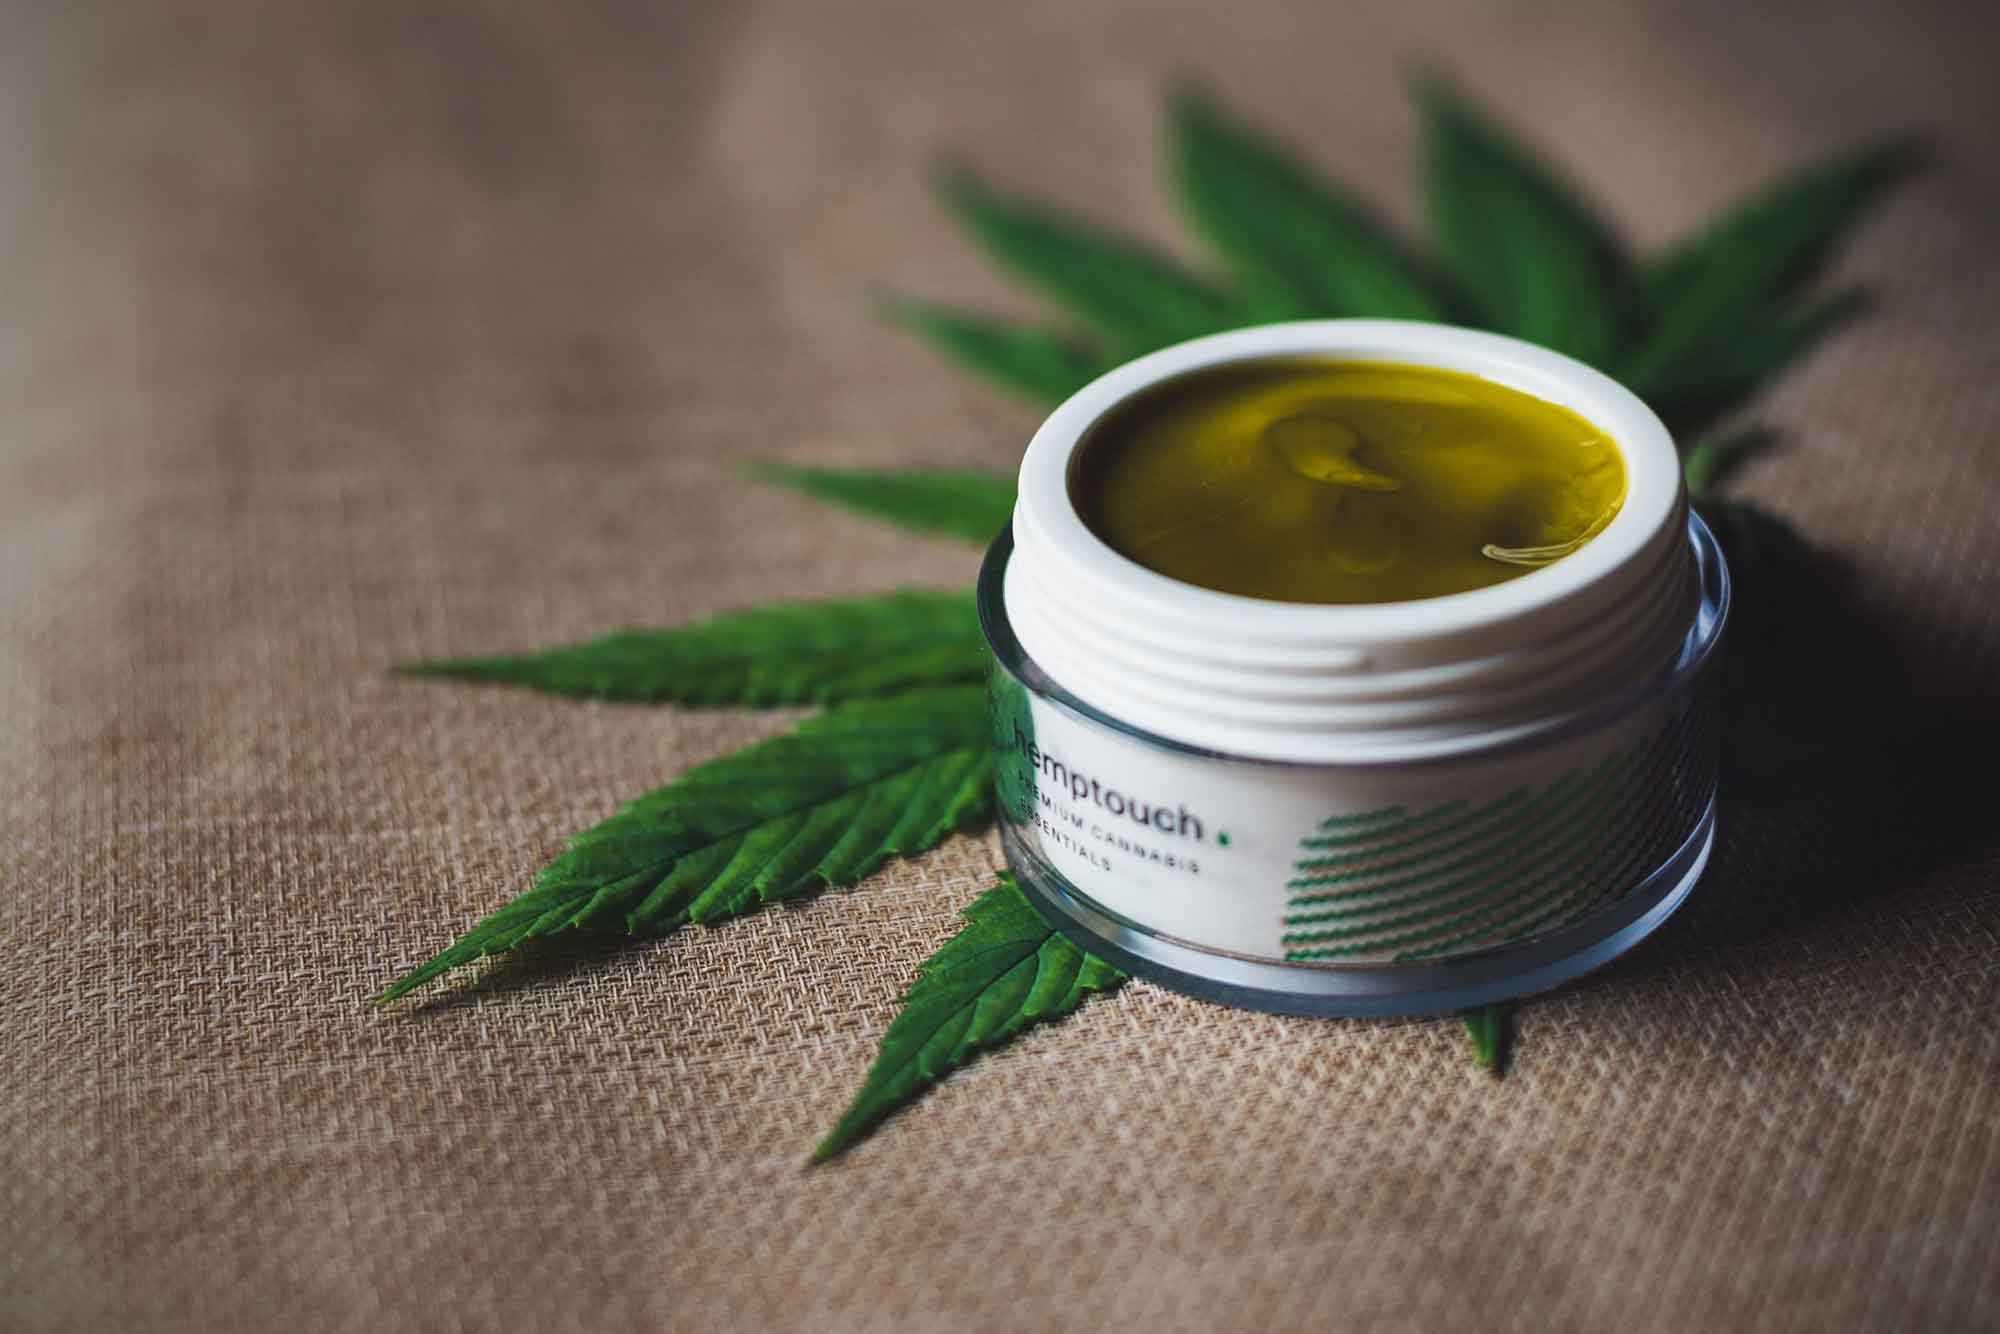 Naming a Cannabis Company? Here’s What to Consider